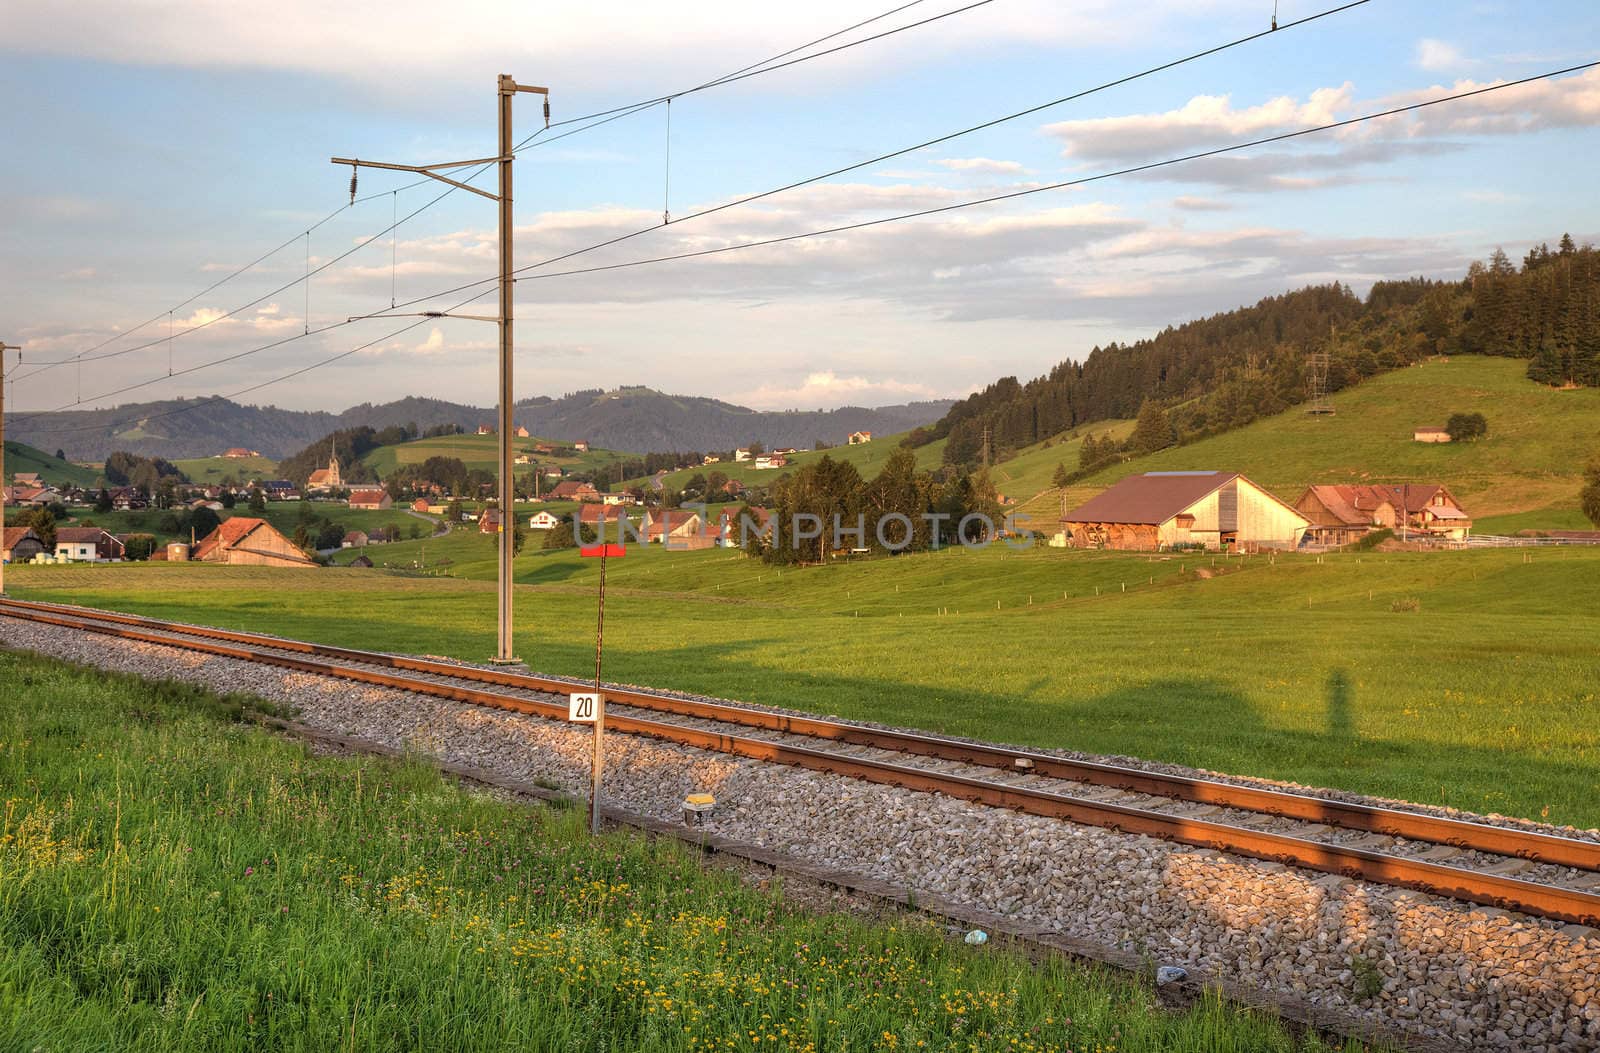 Railroad in swiss Alps before sunset.